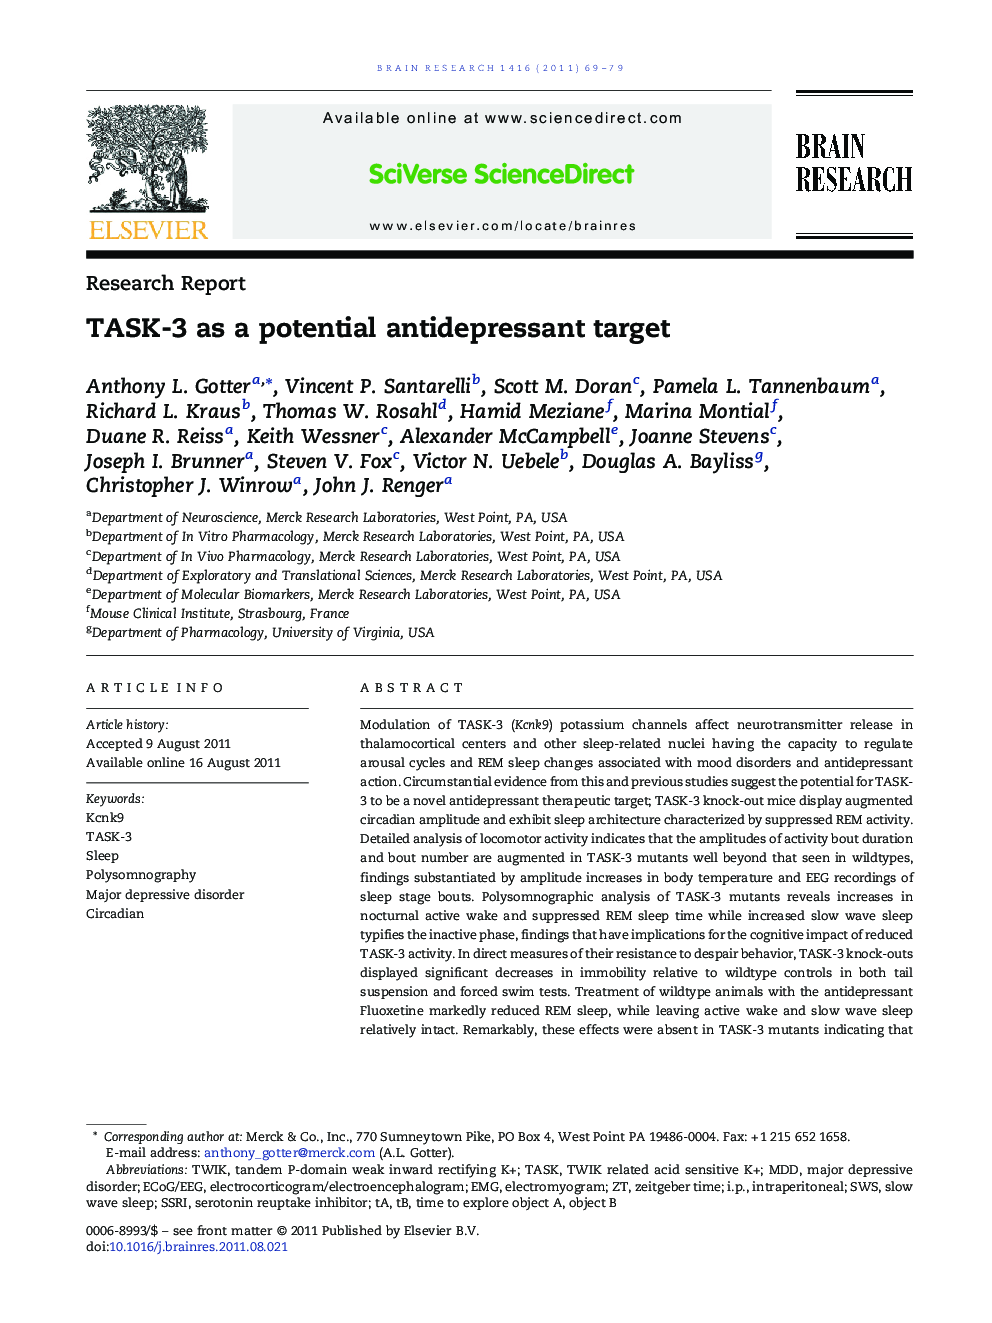 TASK-3 as a potential antidepressant target